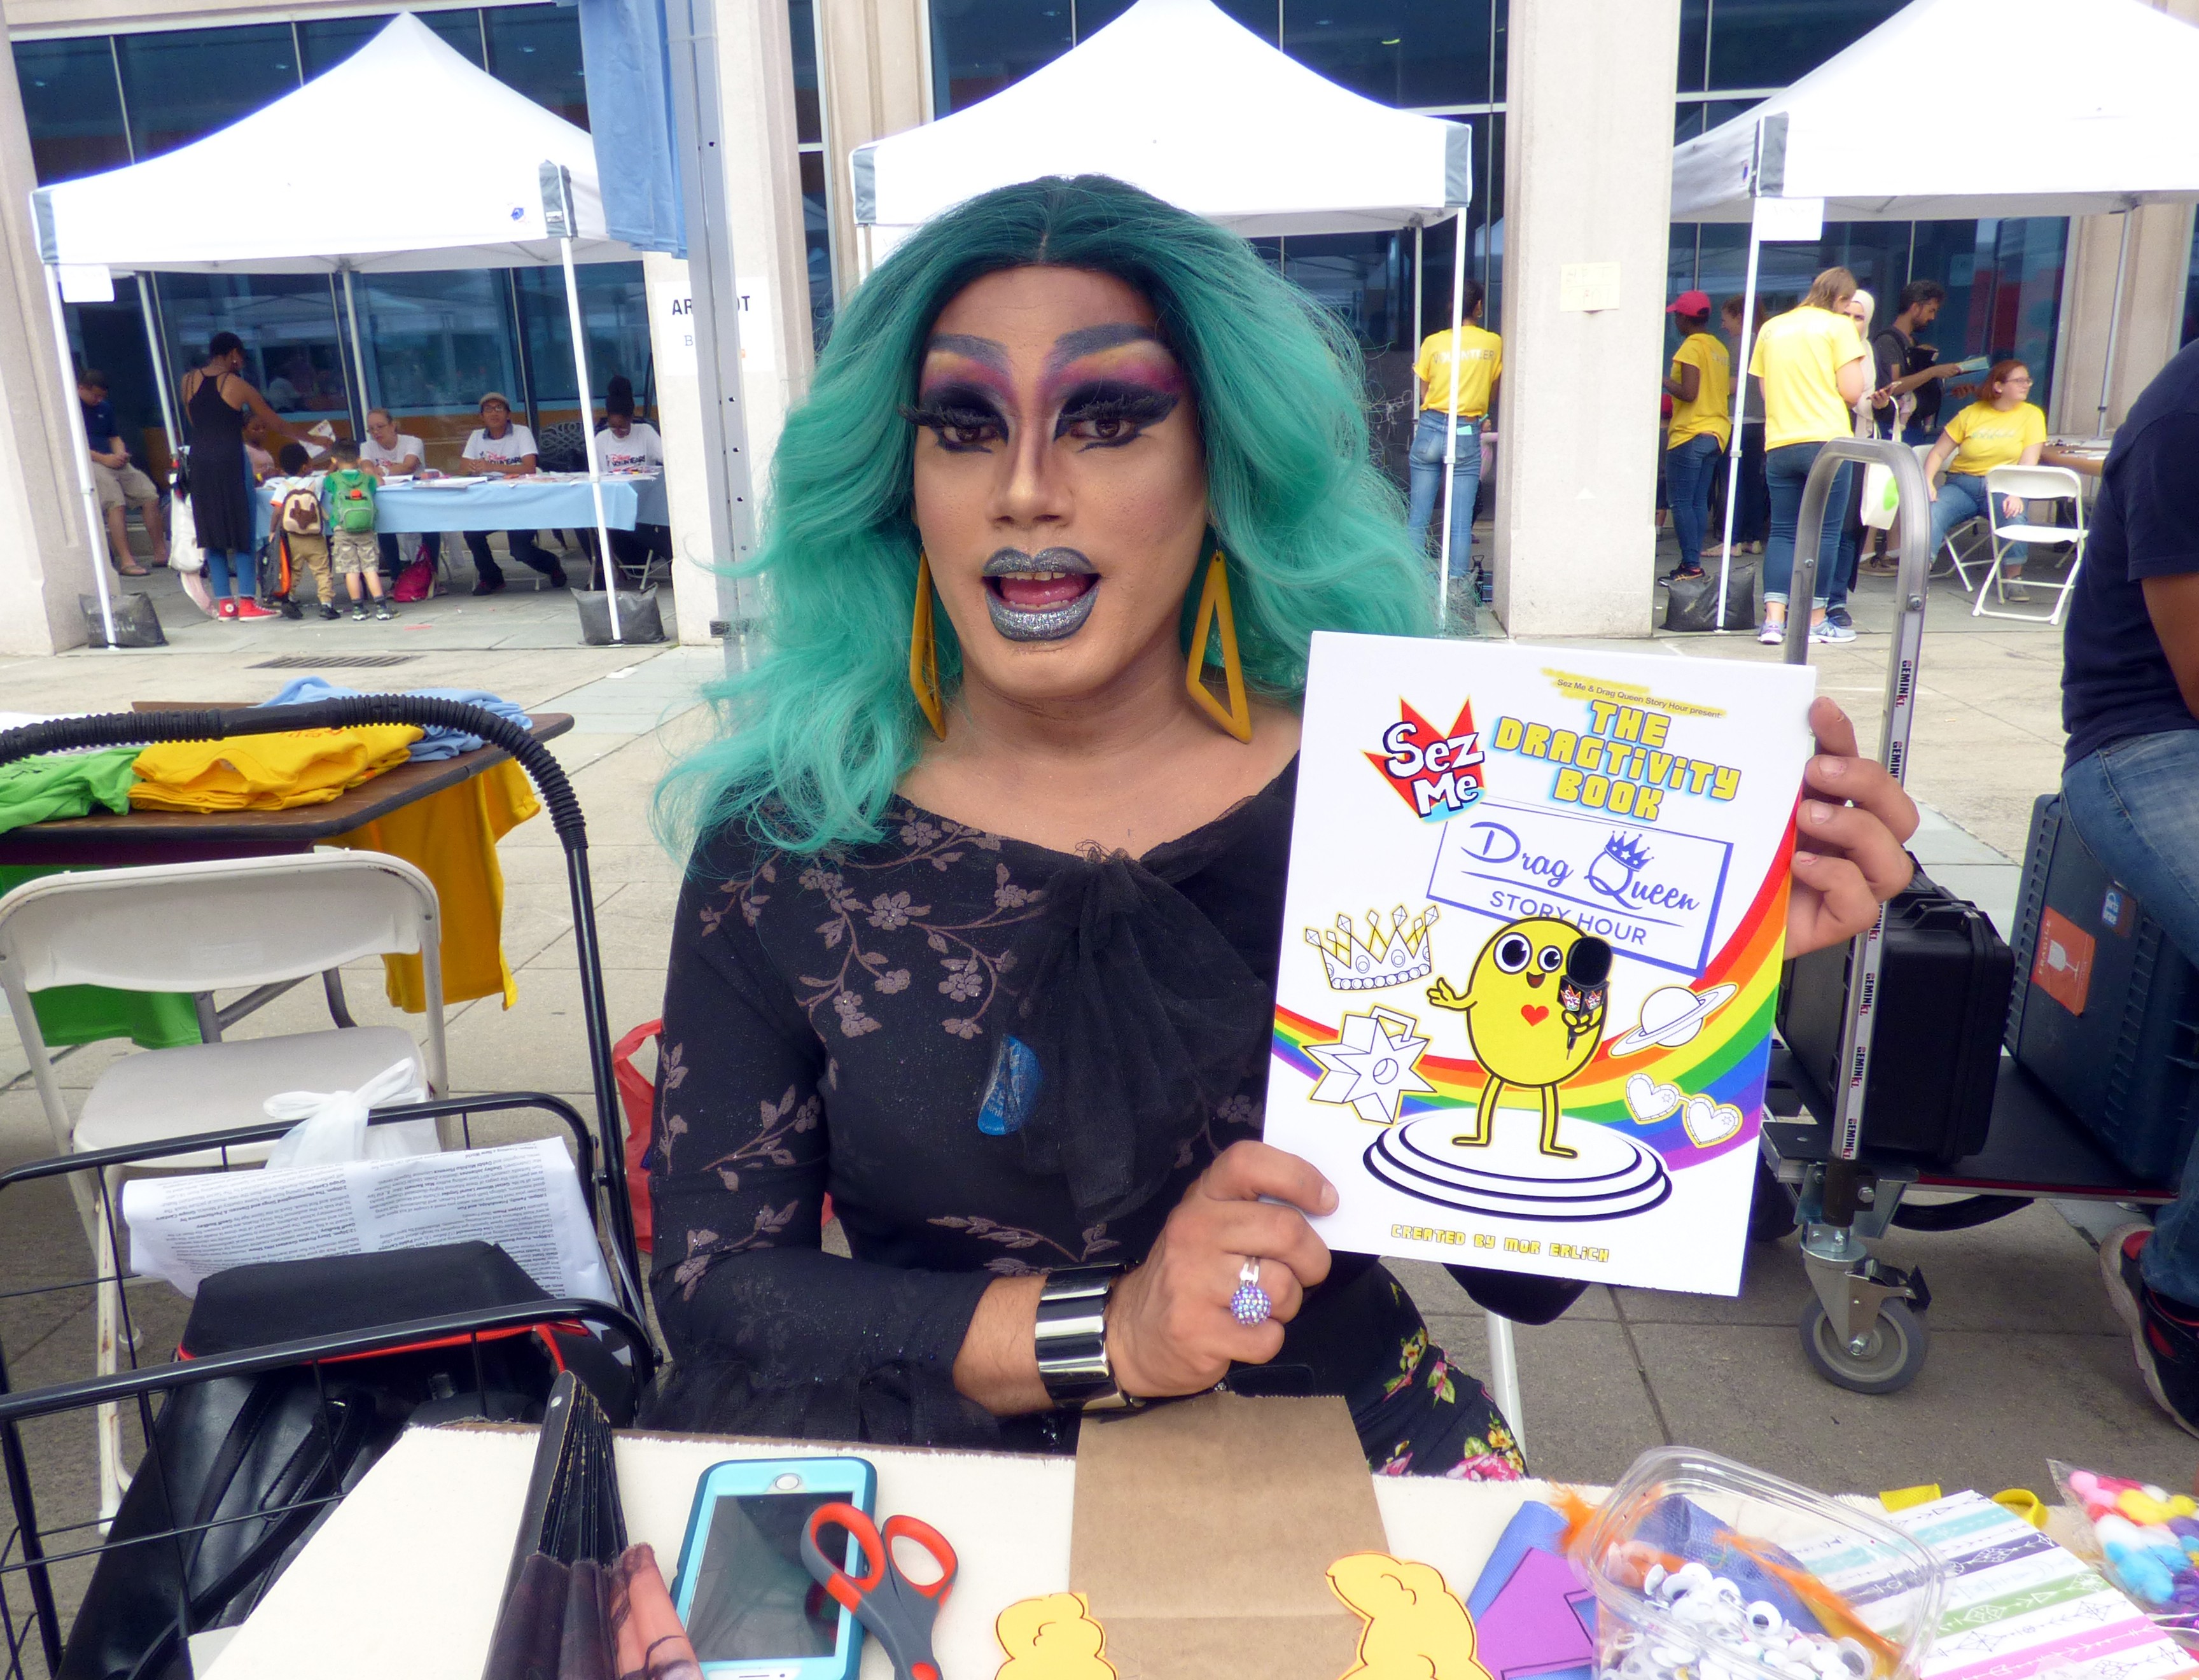 Angel Elektra, a drag queen who reads at Drag Queen Story Hours held at schools and libraries, shows the “Dragtivity Book” written by author Mor Erlich. The book includes activities for kids centered around drag, including finding their own drag names.